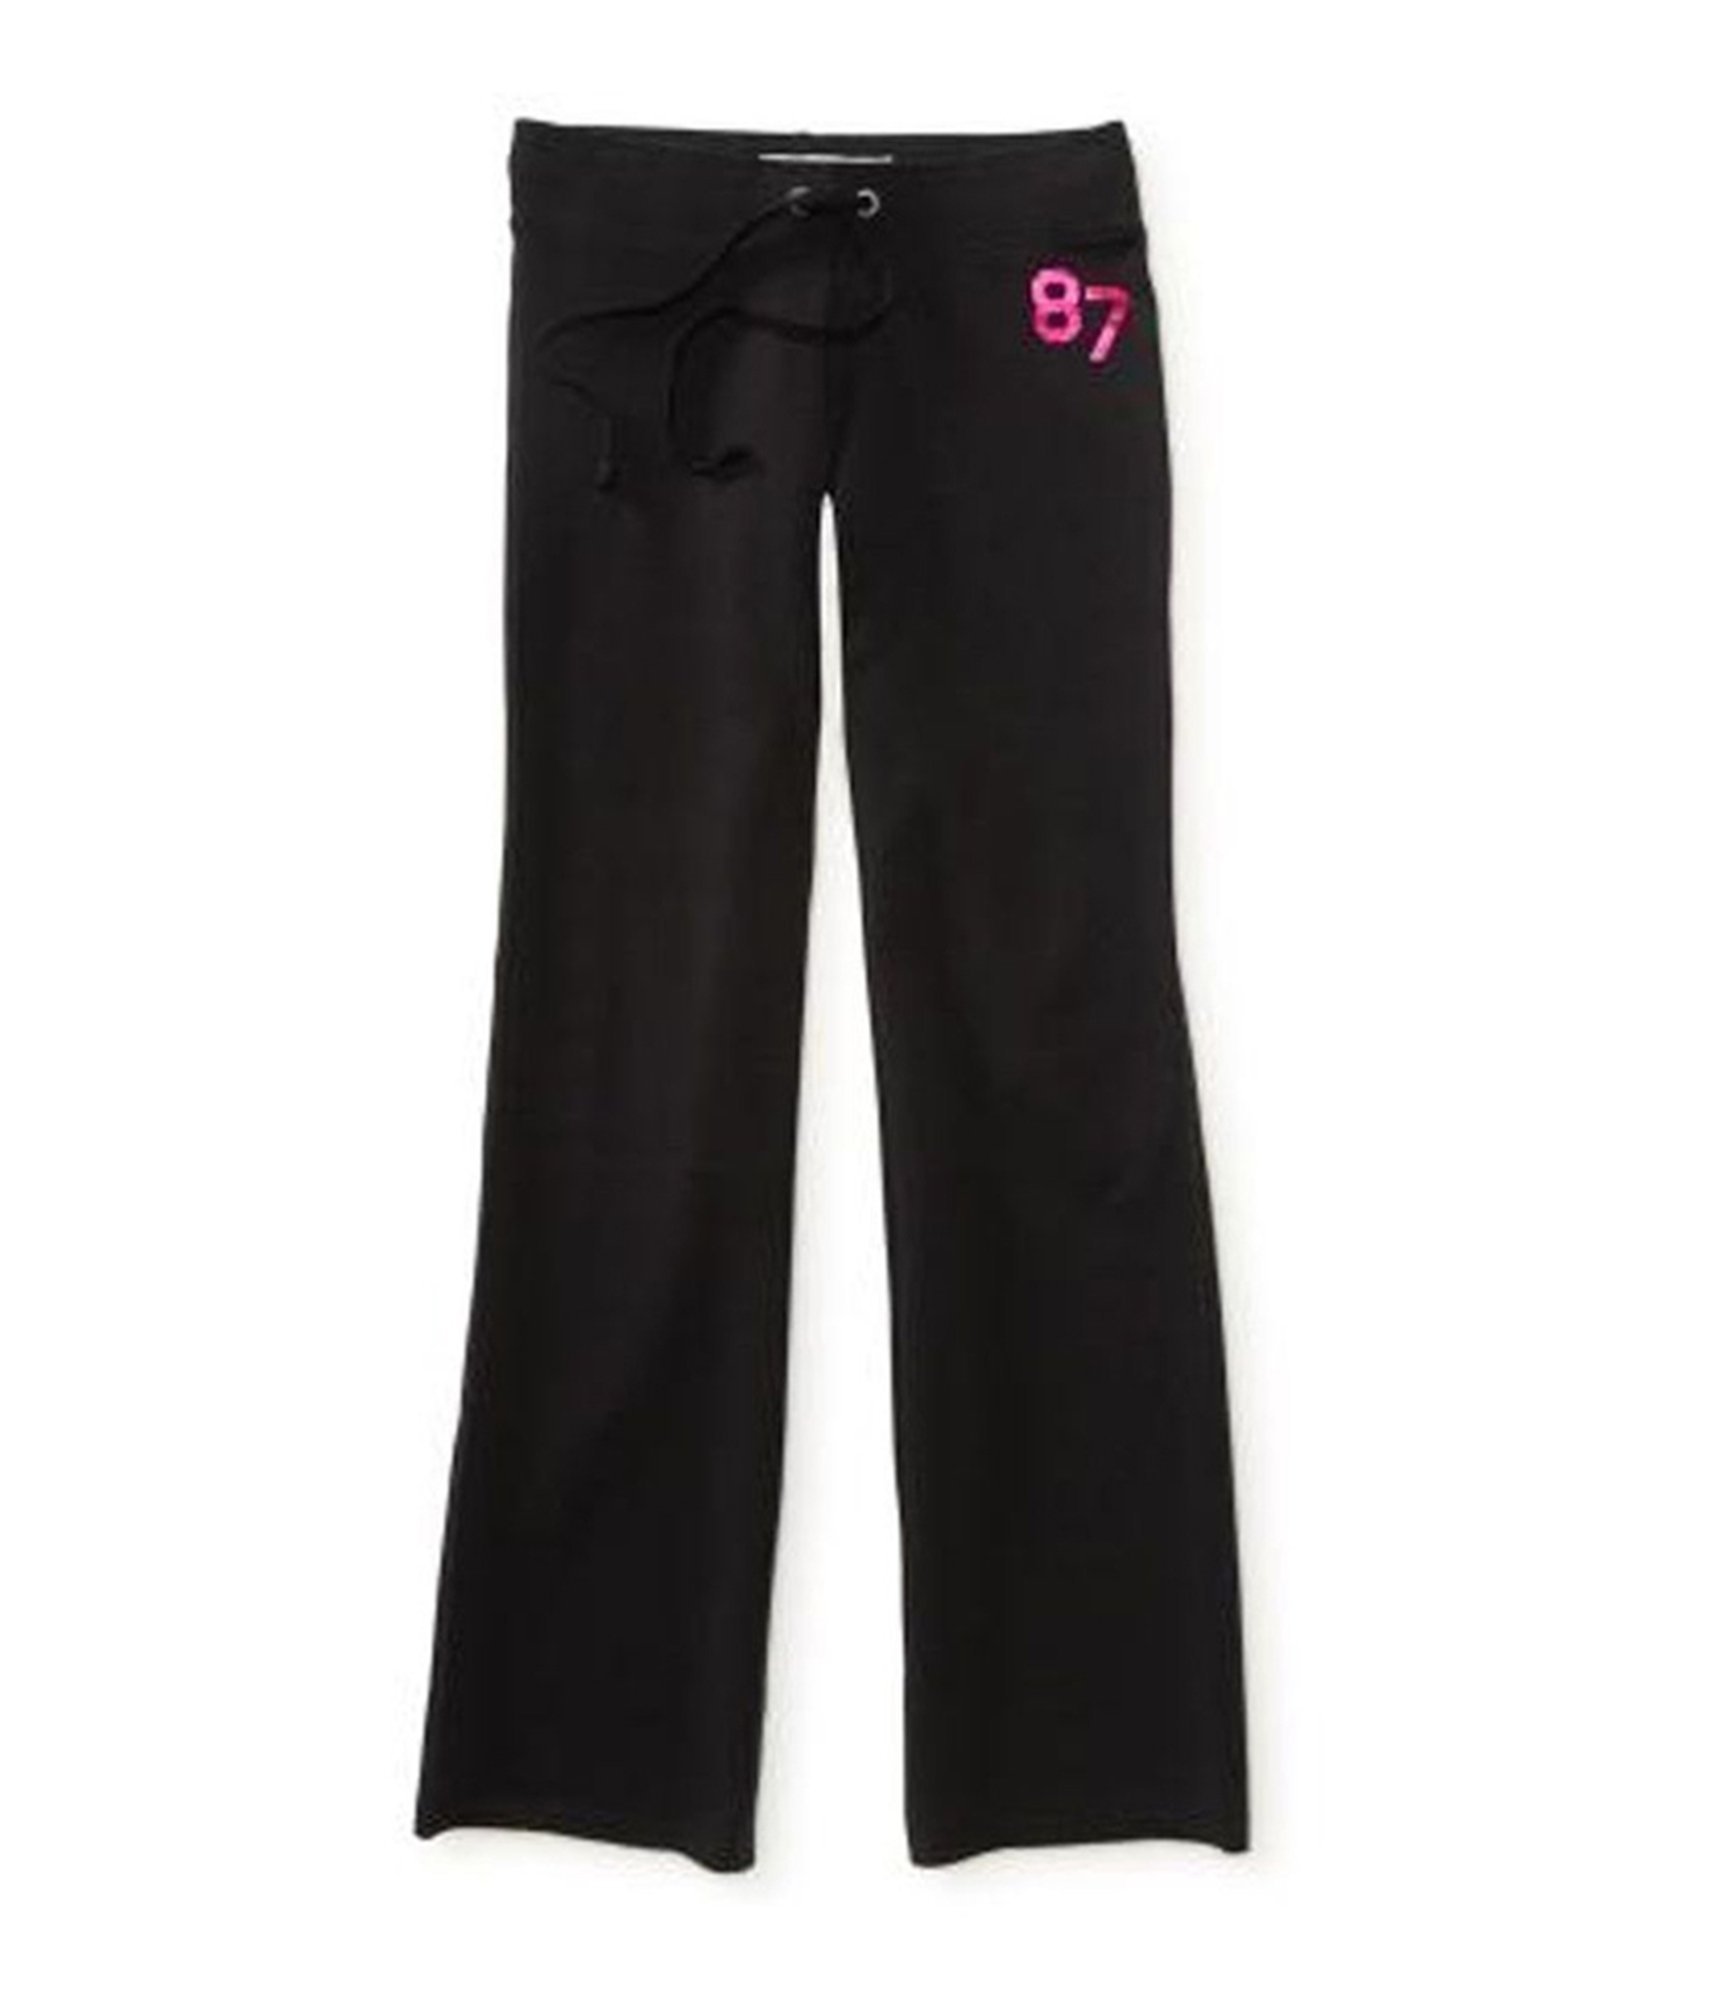 Buy a Aeropostale Womens Fit & Flare Casual Sweatpants, TW2